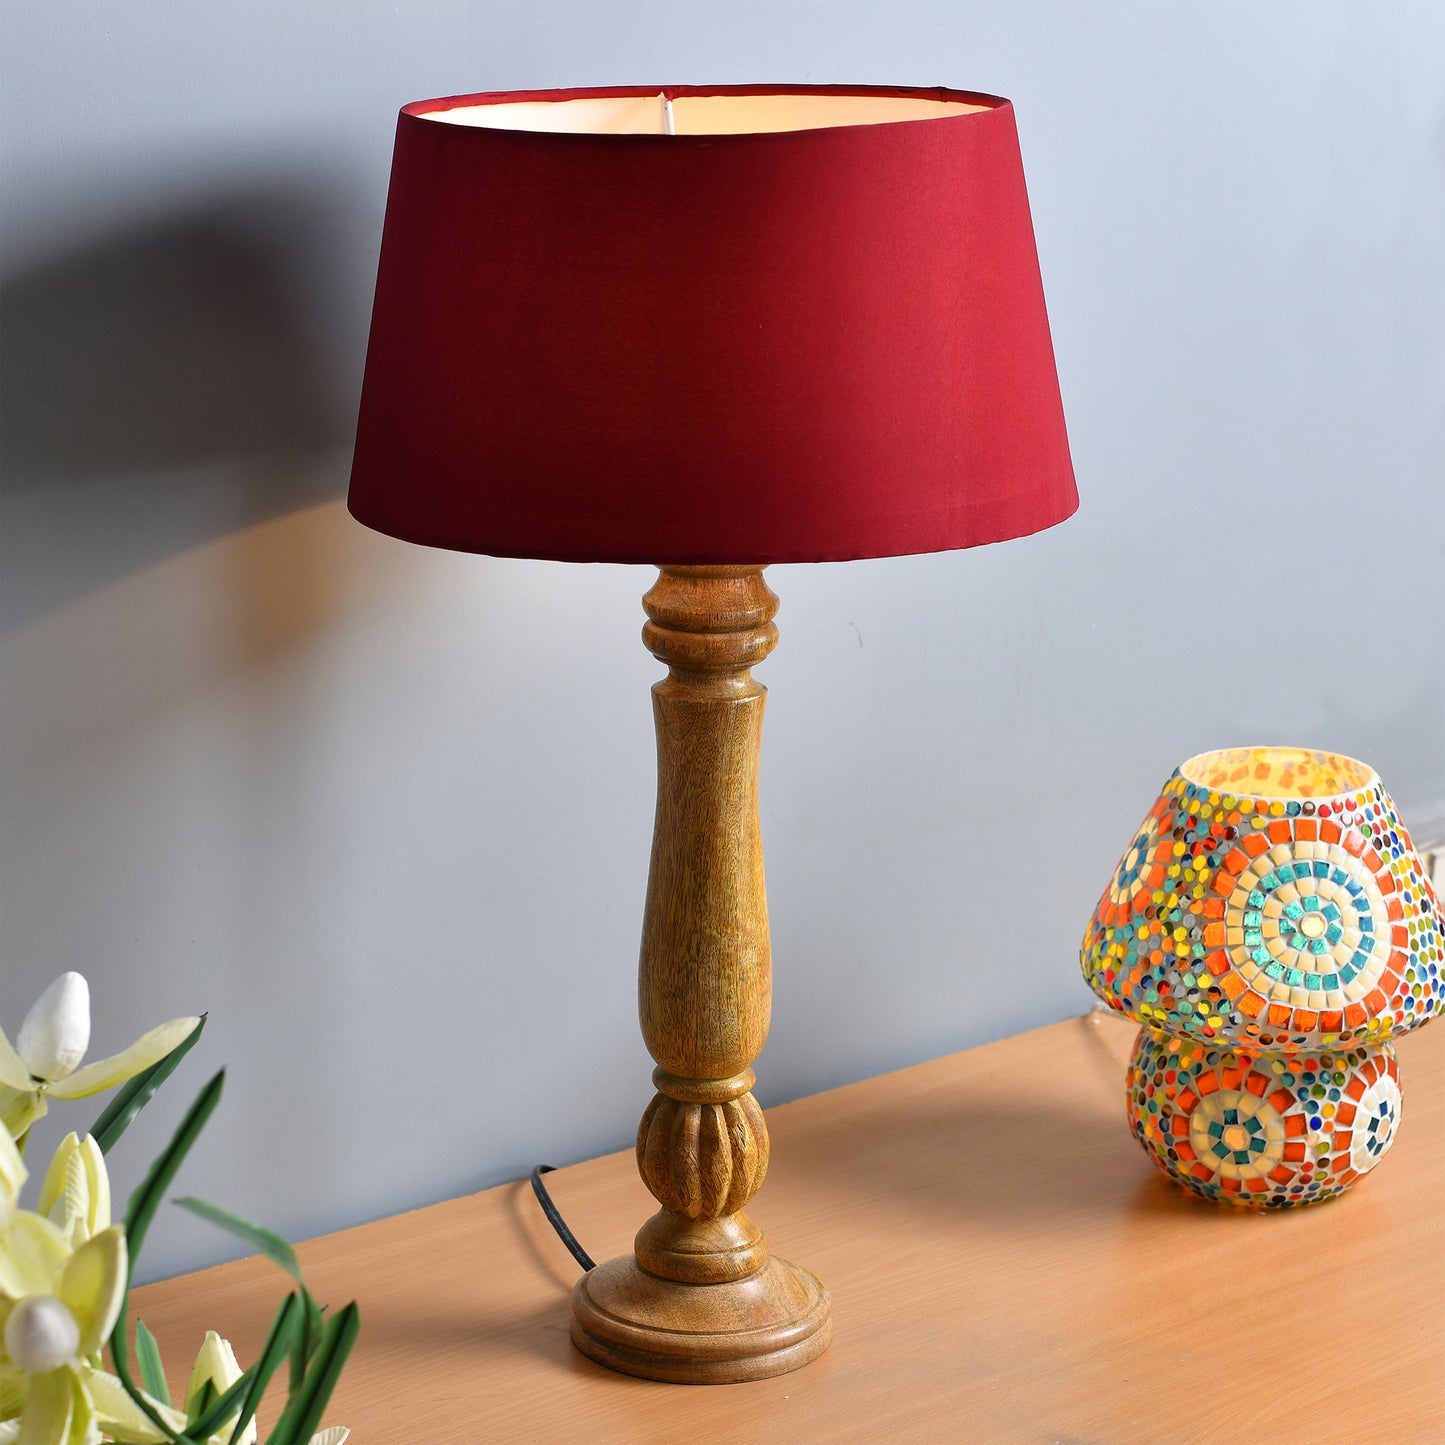 Classic Victorian Natural Wood Table Lamp With Shade